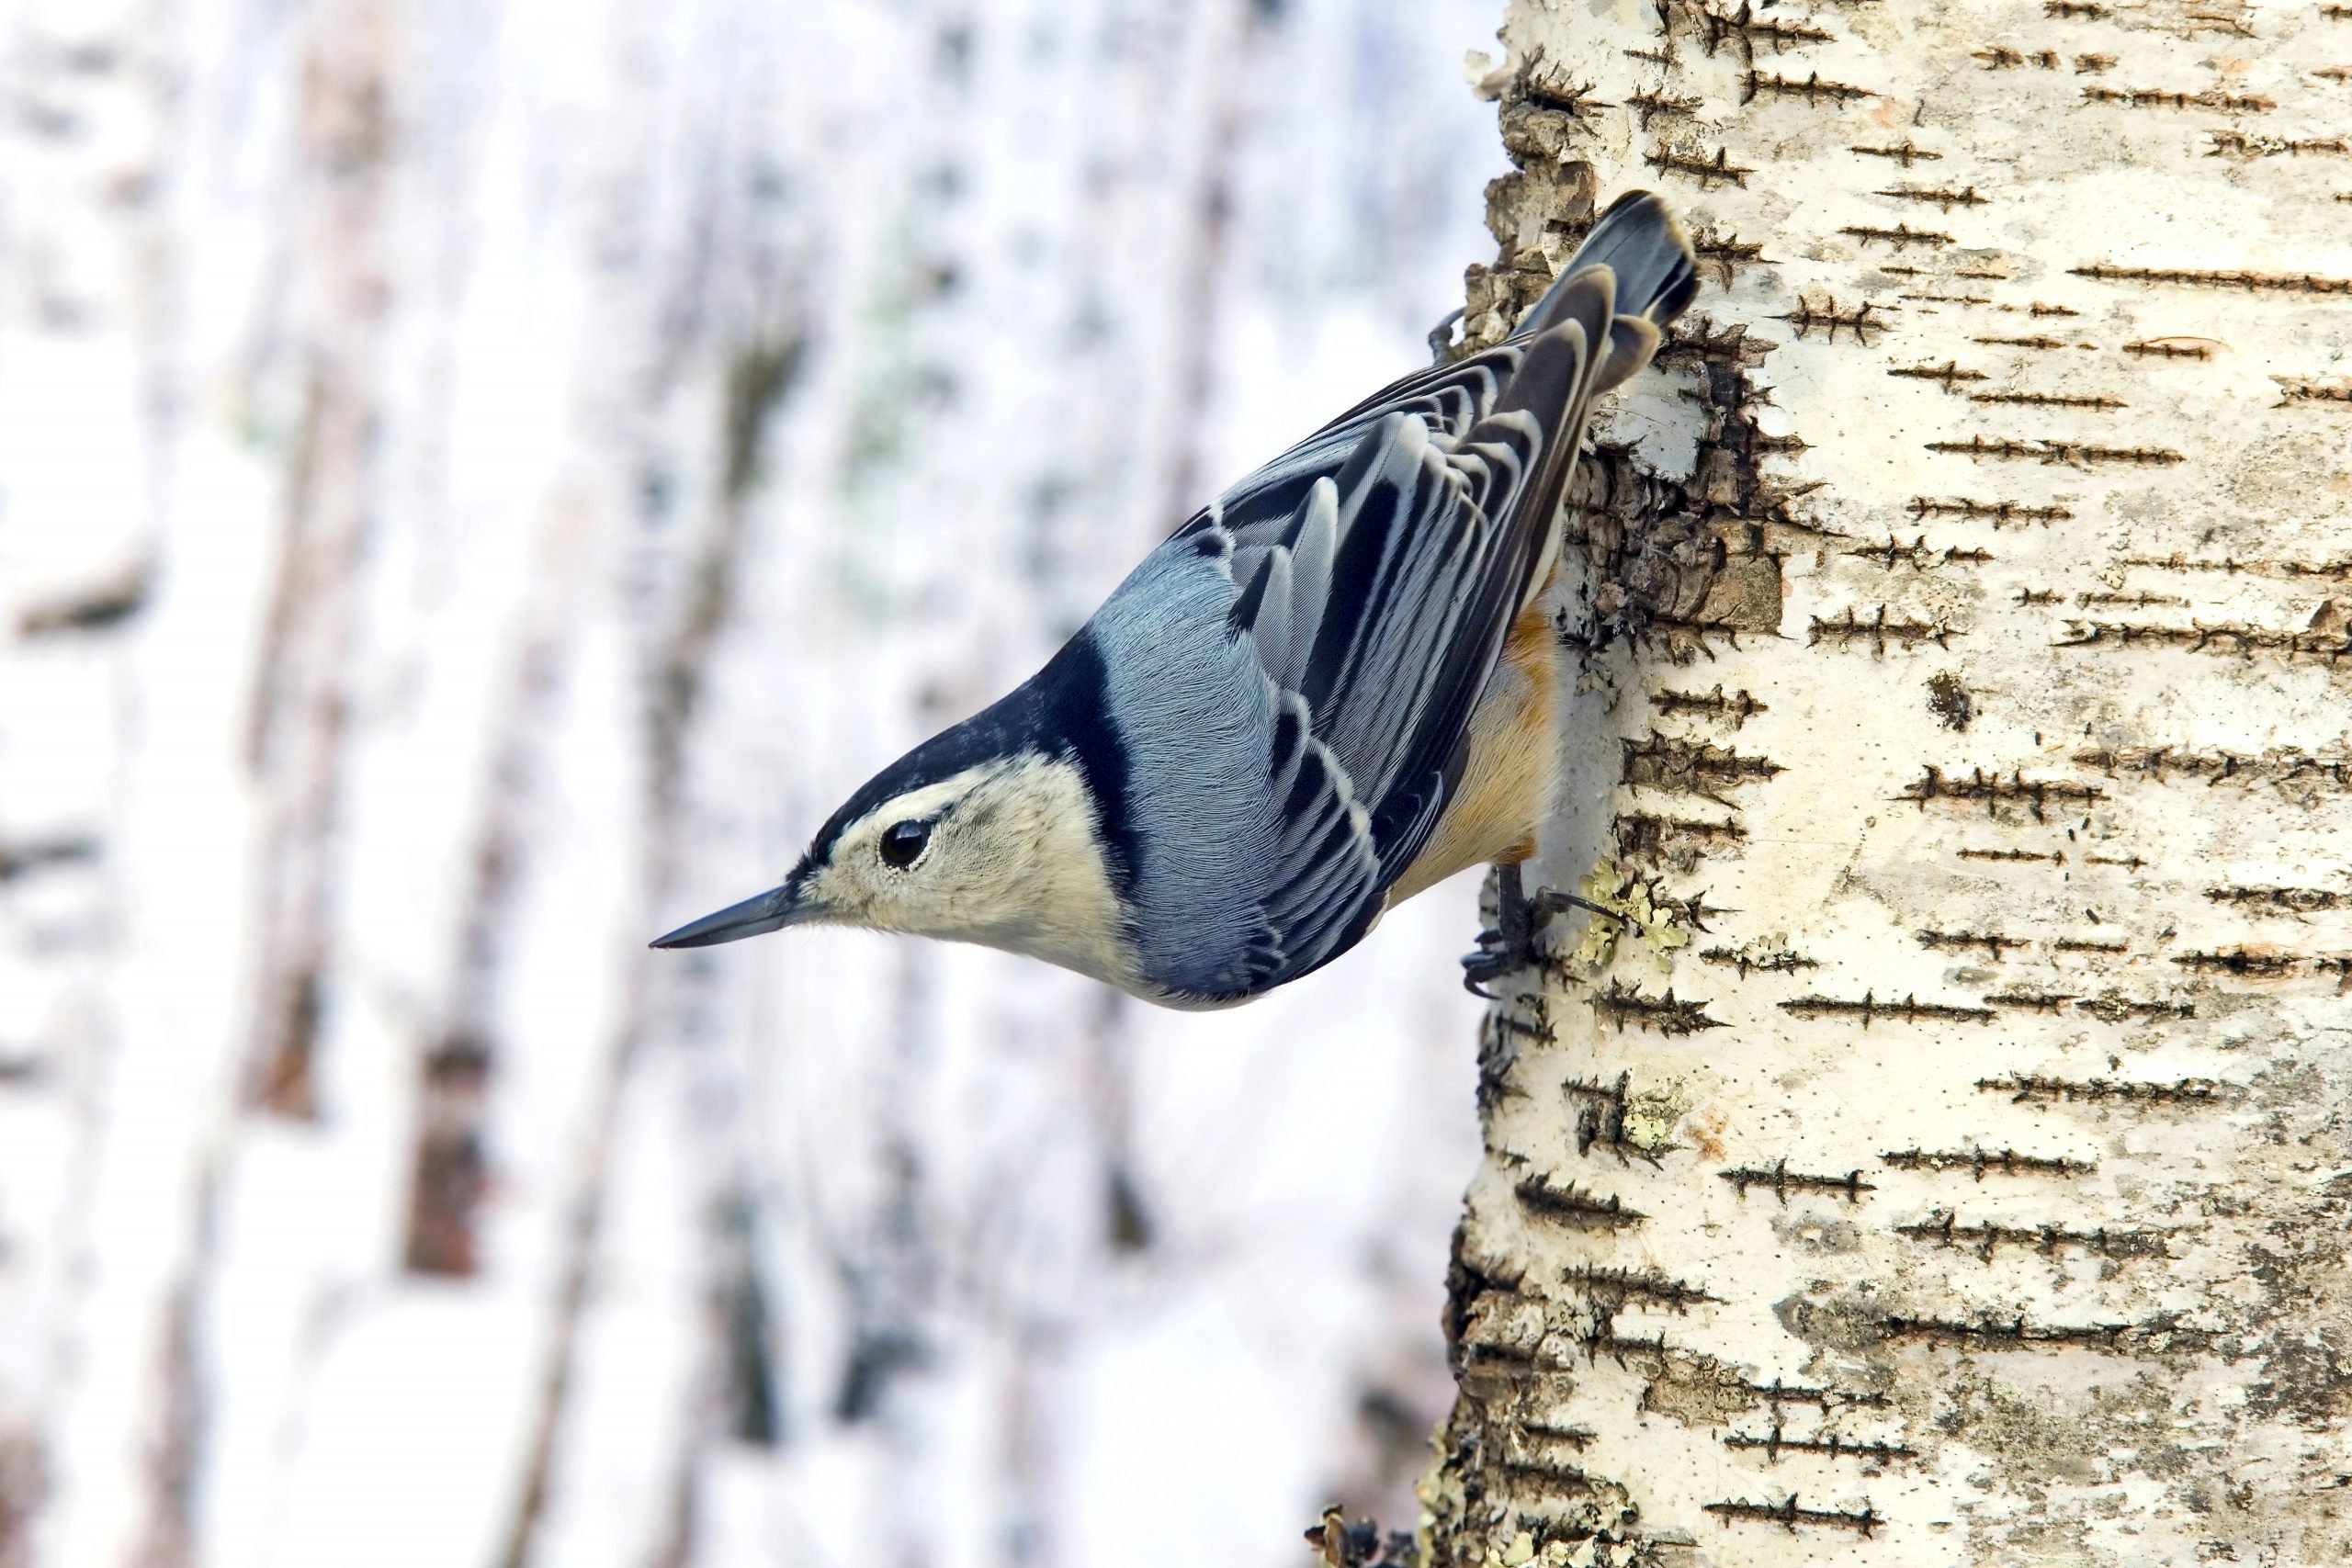 Get to Know the Gravity-Defying Nuthatch Bird Family